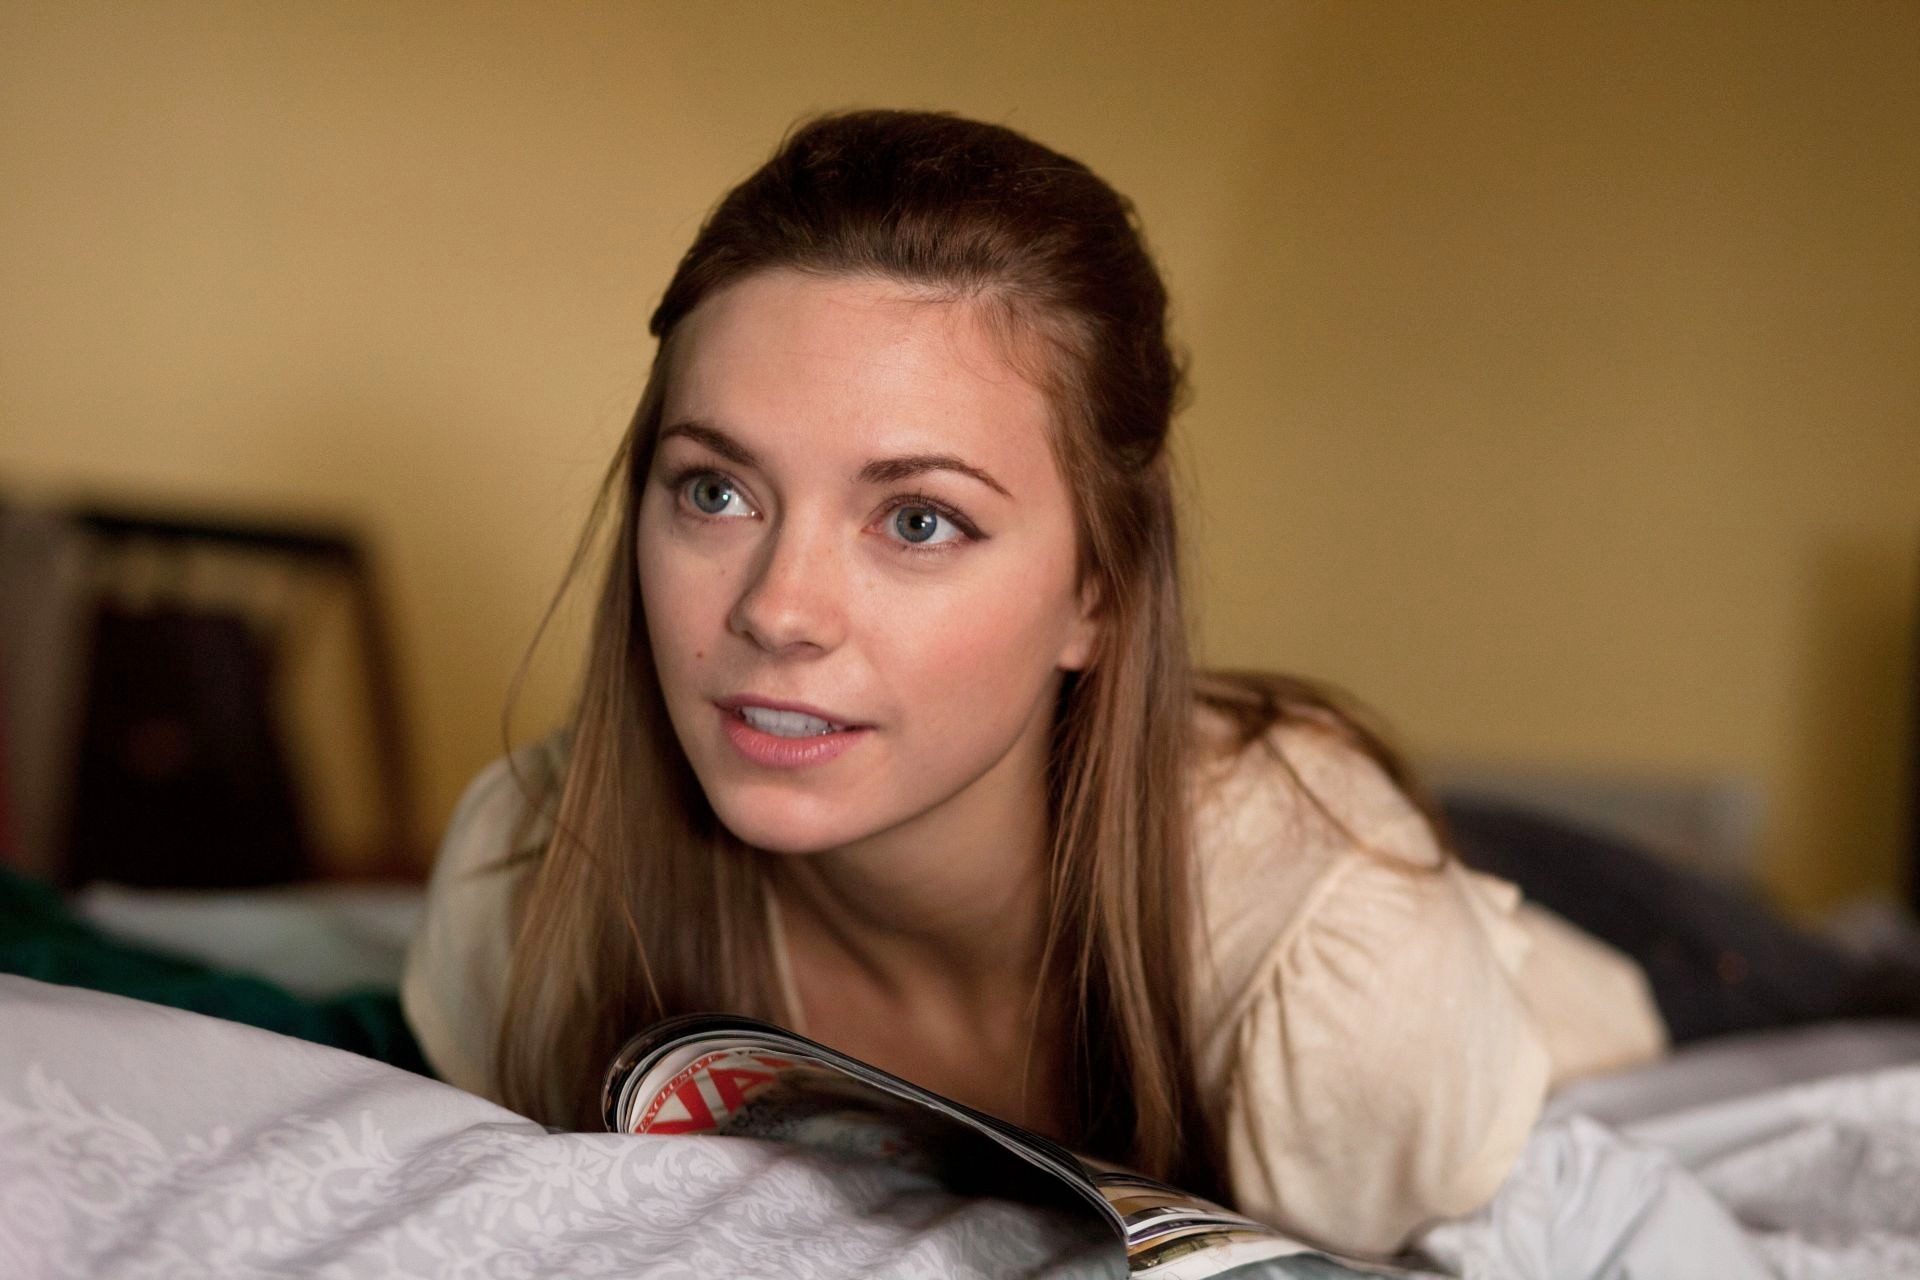 Carrie MacLemore stars as Heather in Sony Pictures Classics' Damsels in Distress (2012). Photo credit by Sabrina Lantos.